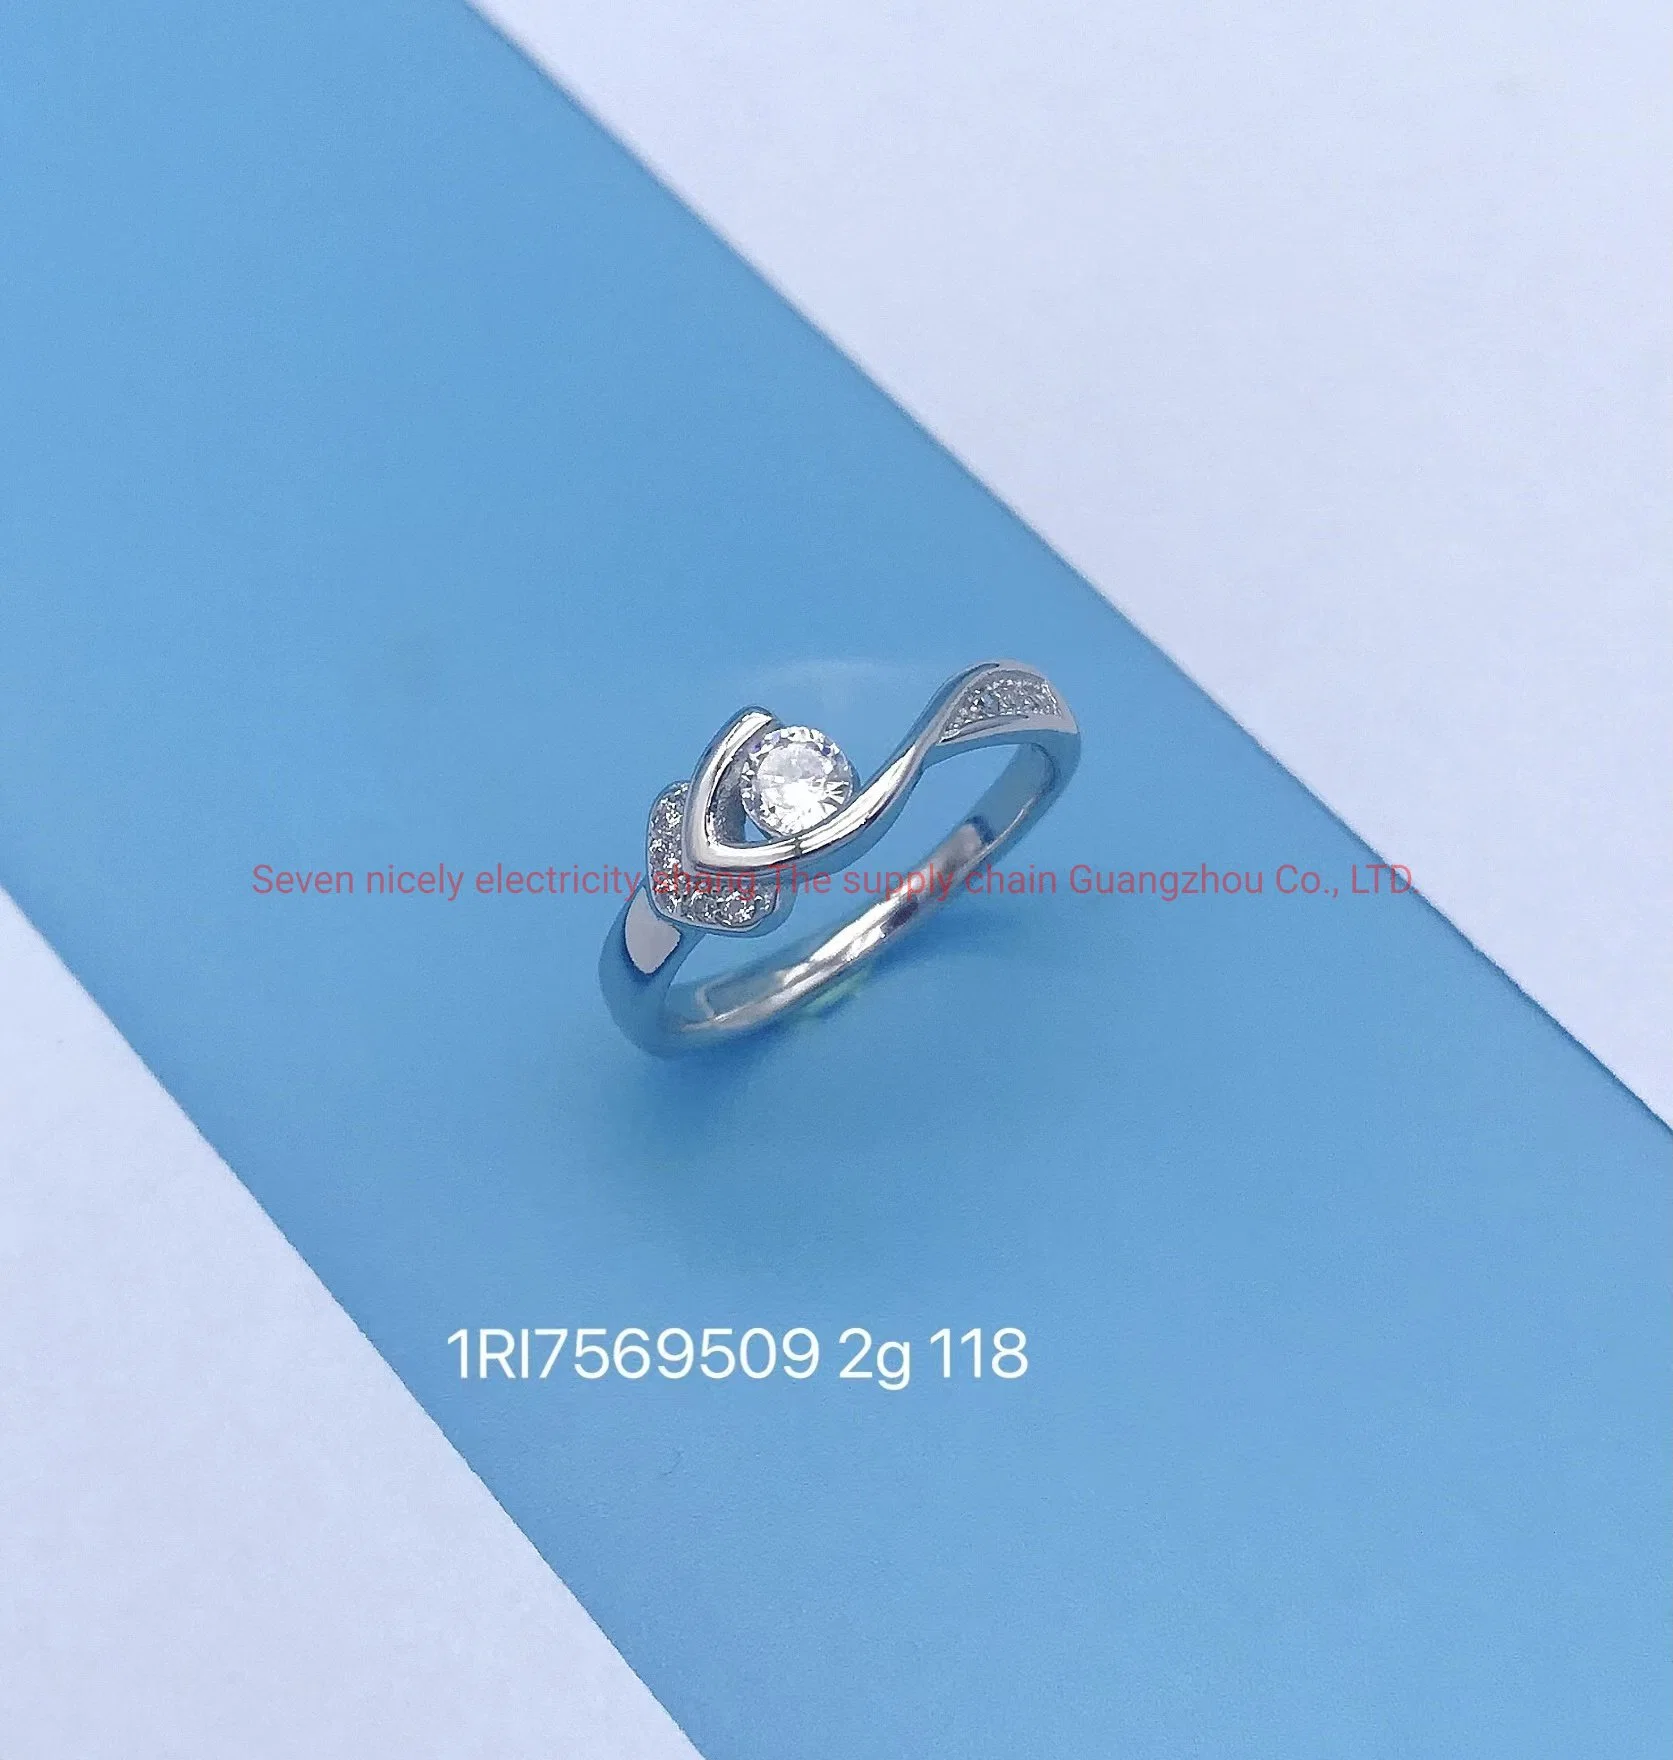 OEM Custom Fashion Jewellery 925 Silver Jewelry Delicate Gift Attractive Ring for Party Charming High Quality Elegant Minimalistic Lady Ring